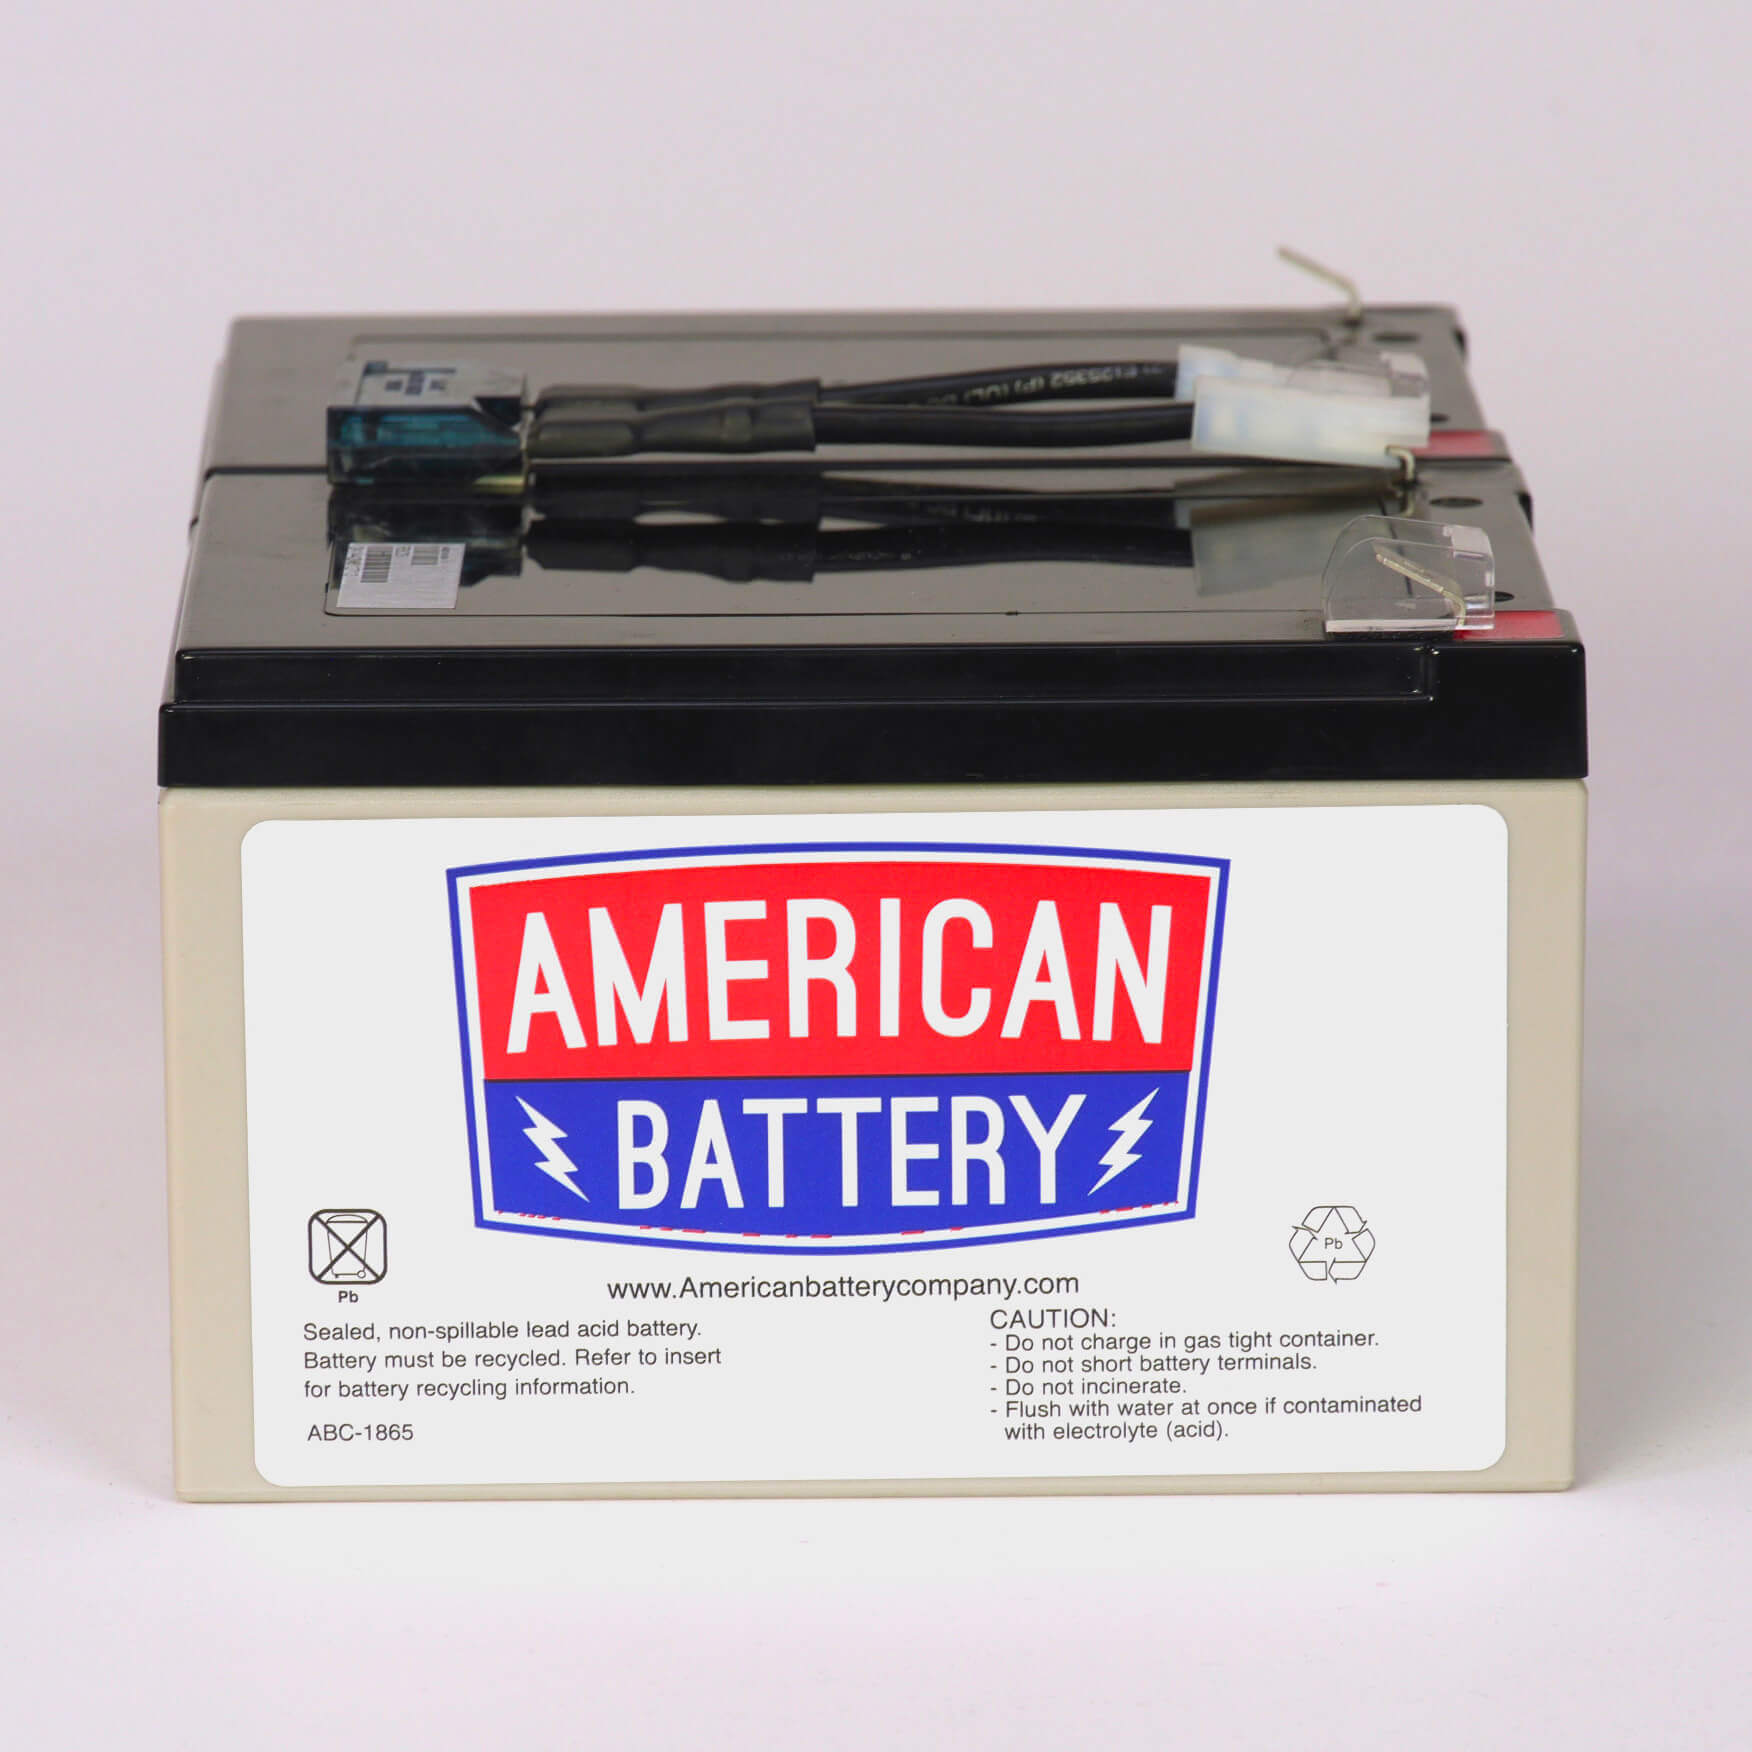 APC RBC6 Replacement Battery